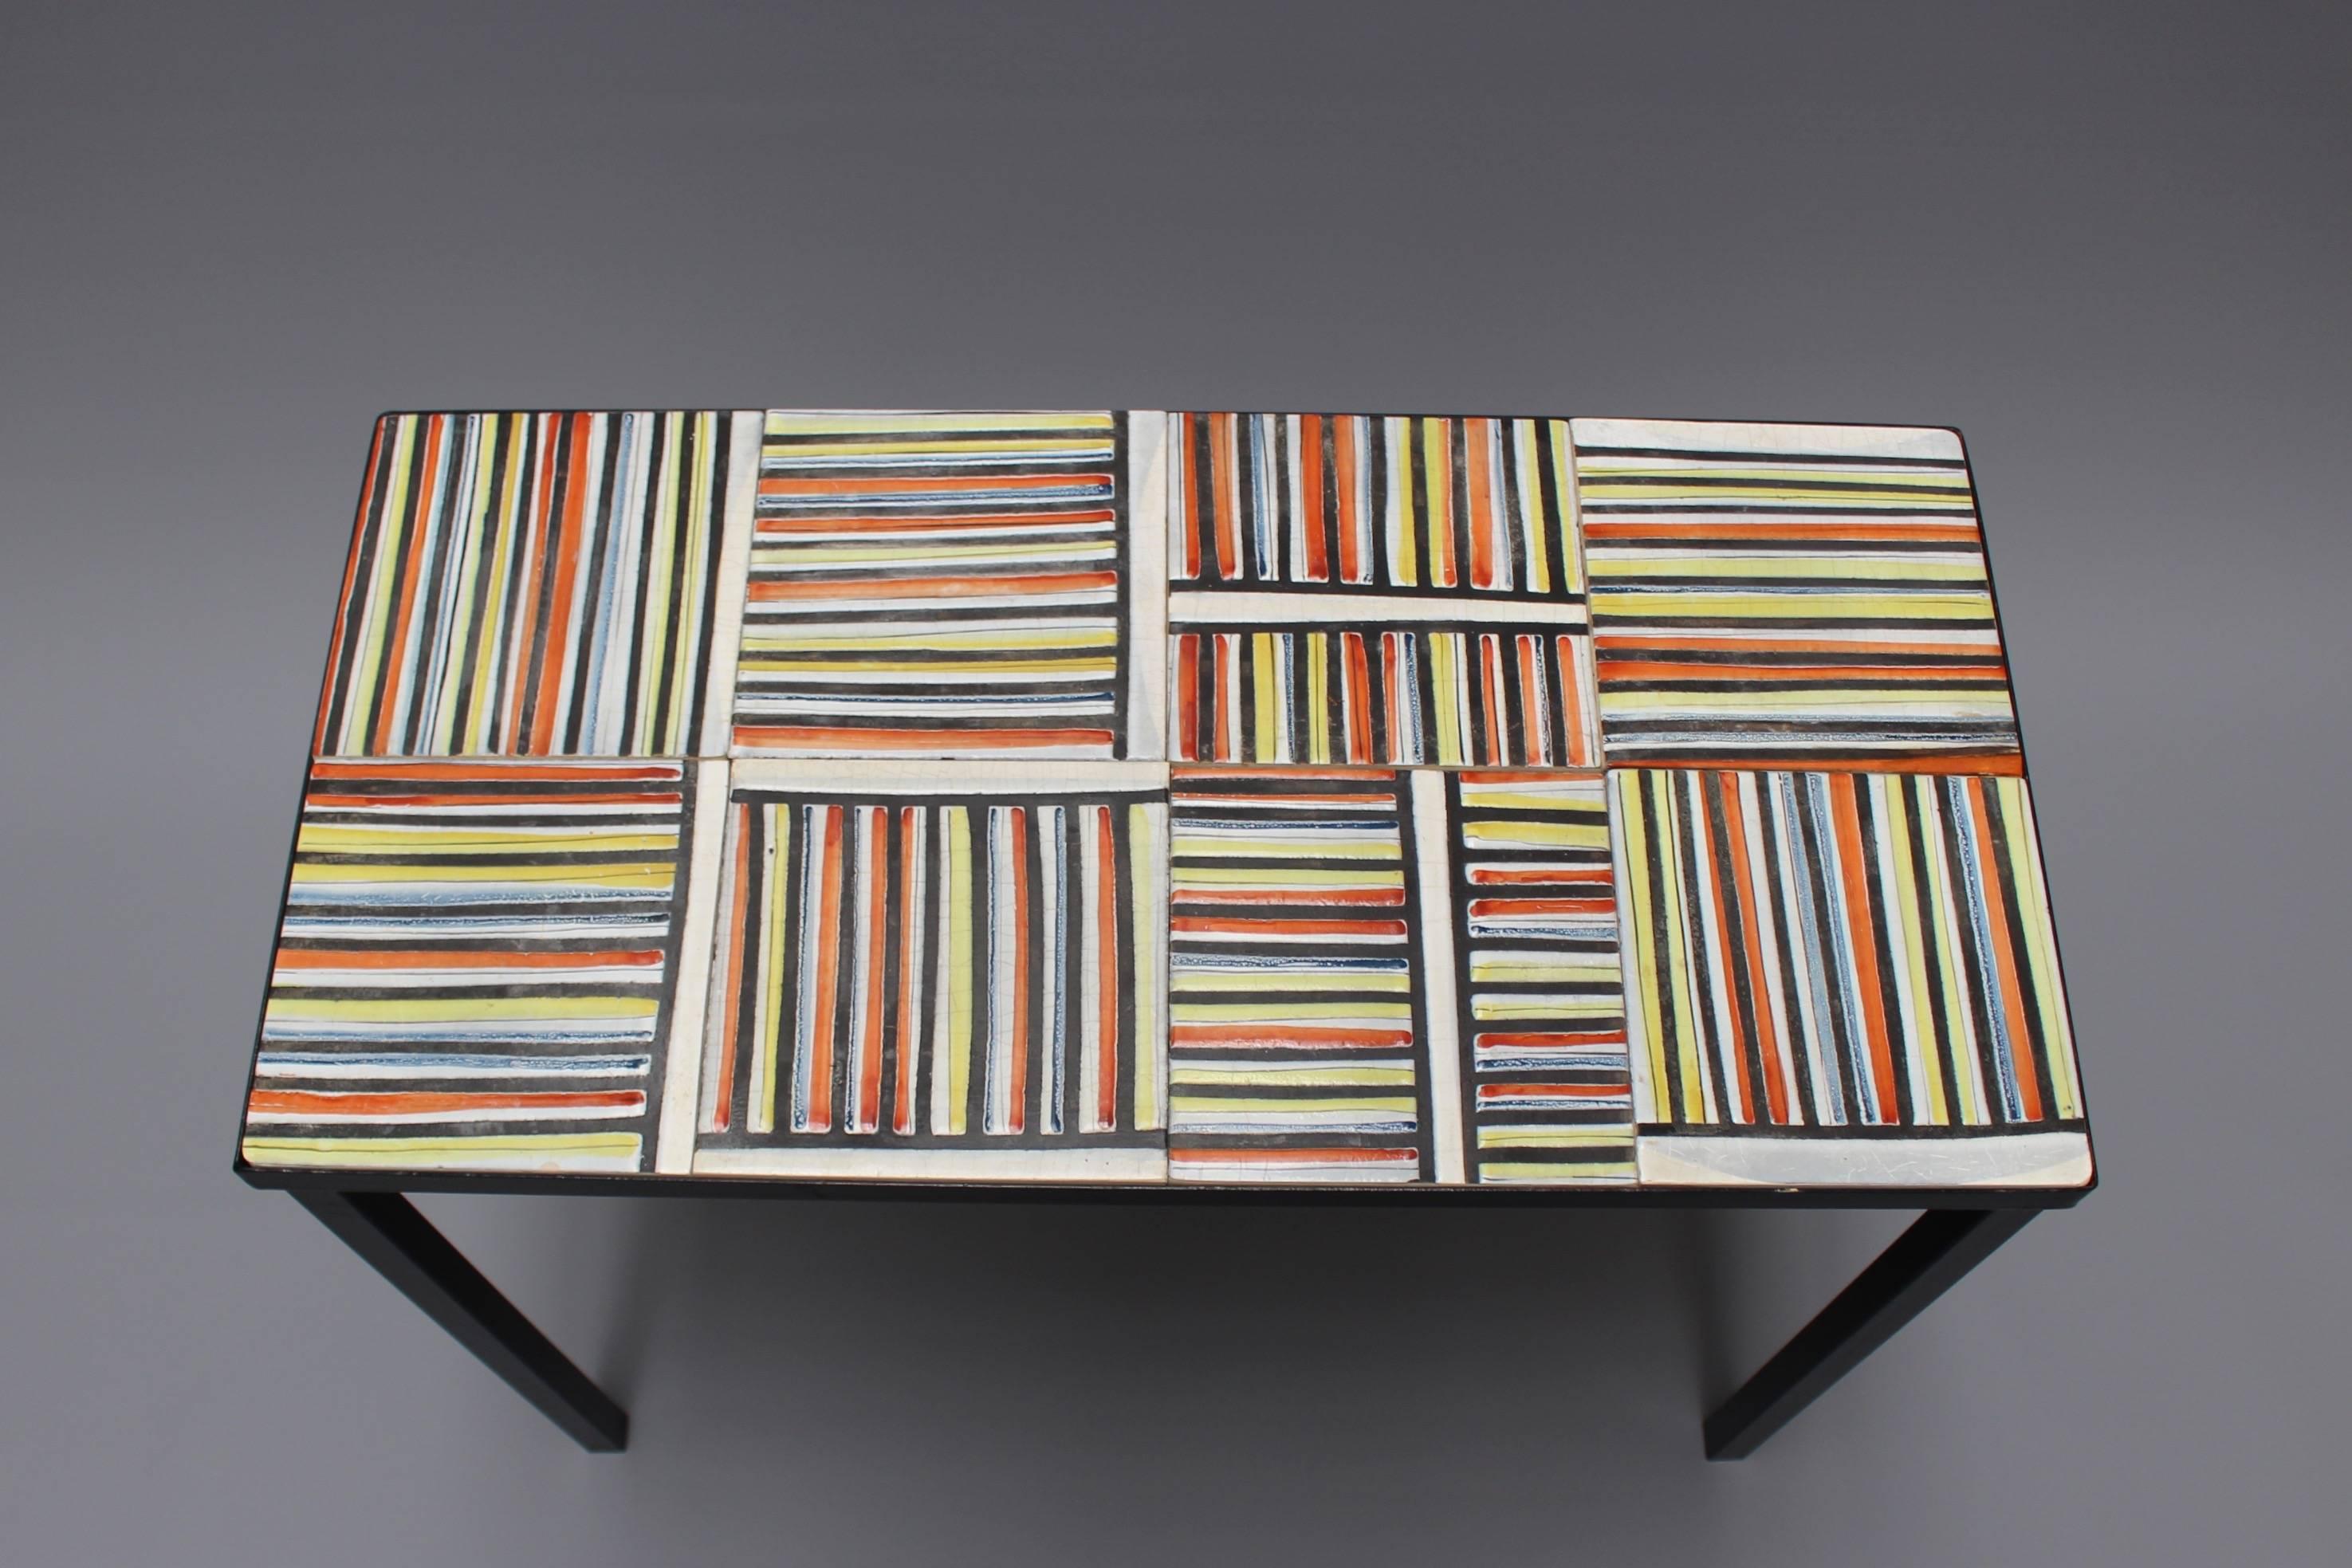 Mid-20th Century Coffee Table with 'Pyjama' Ceramic Tiles by Roger Capron, Vallauris, circa 1950s